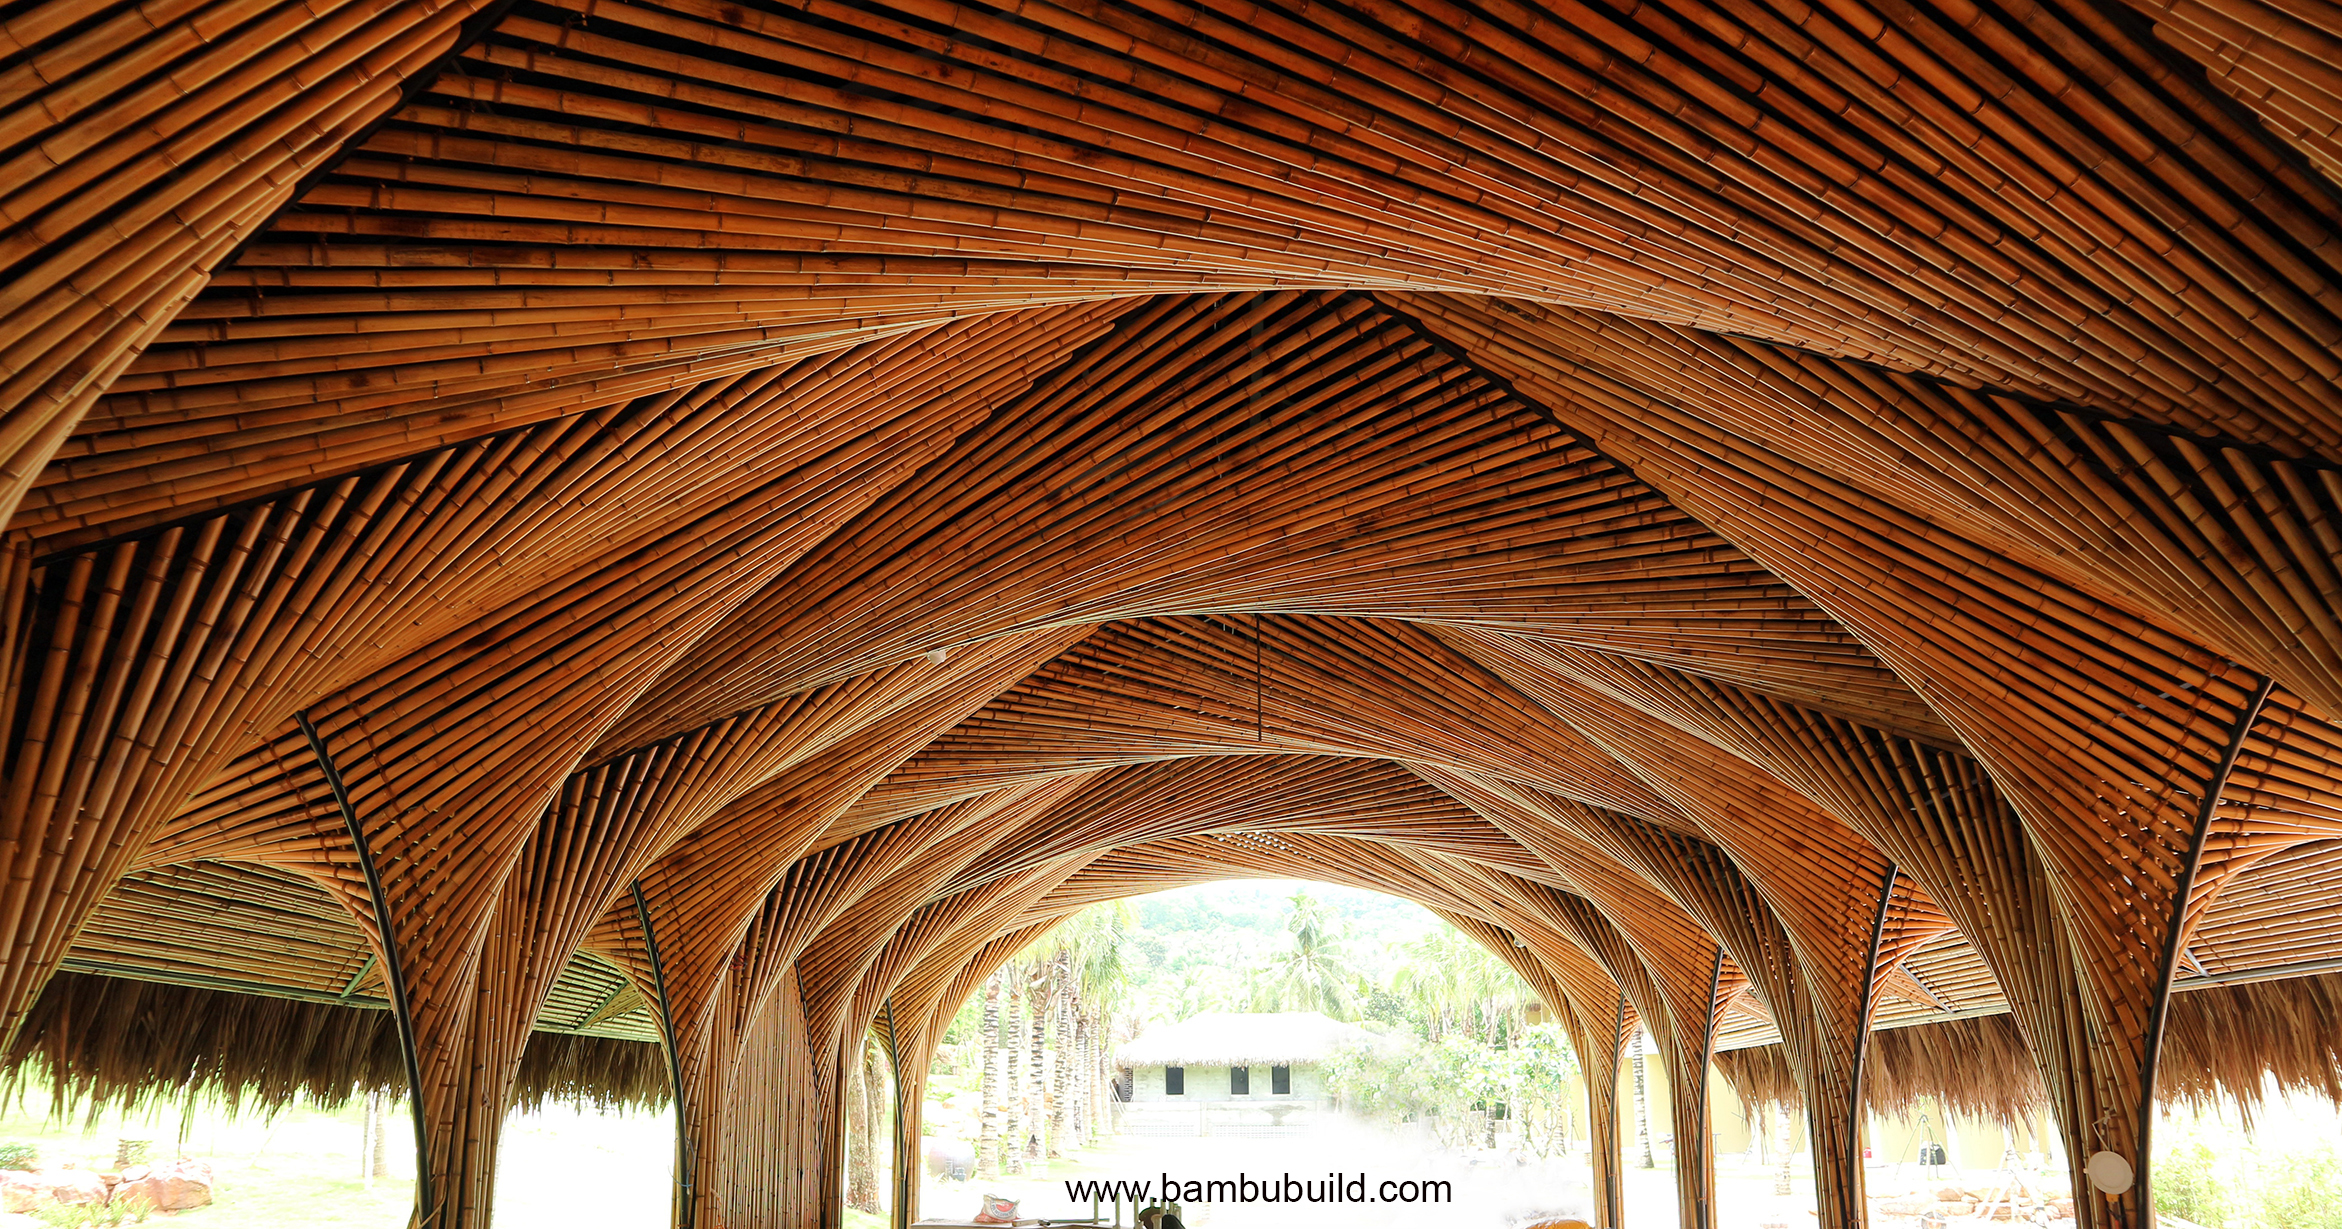 Bamboo architecture in Phu Quoc